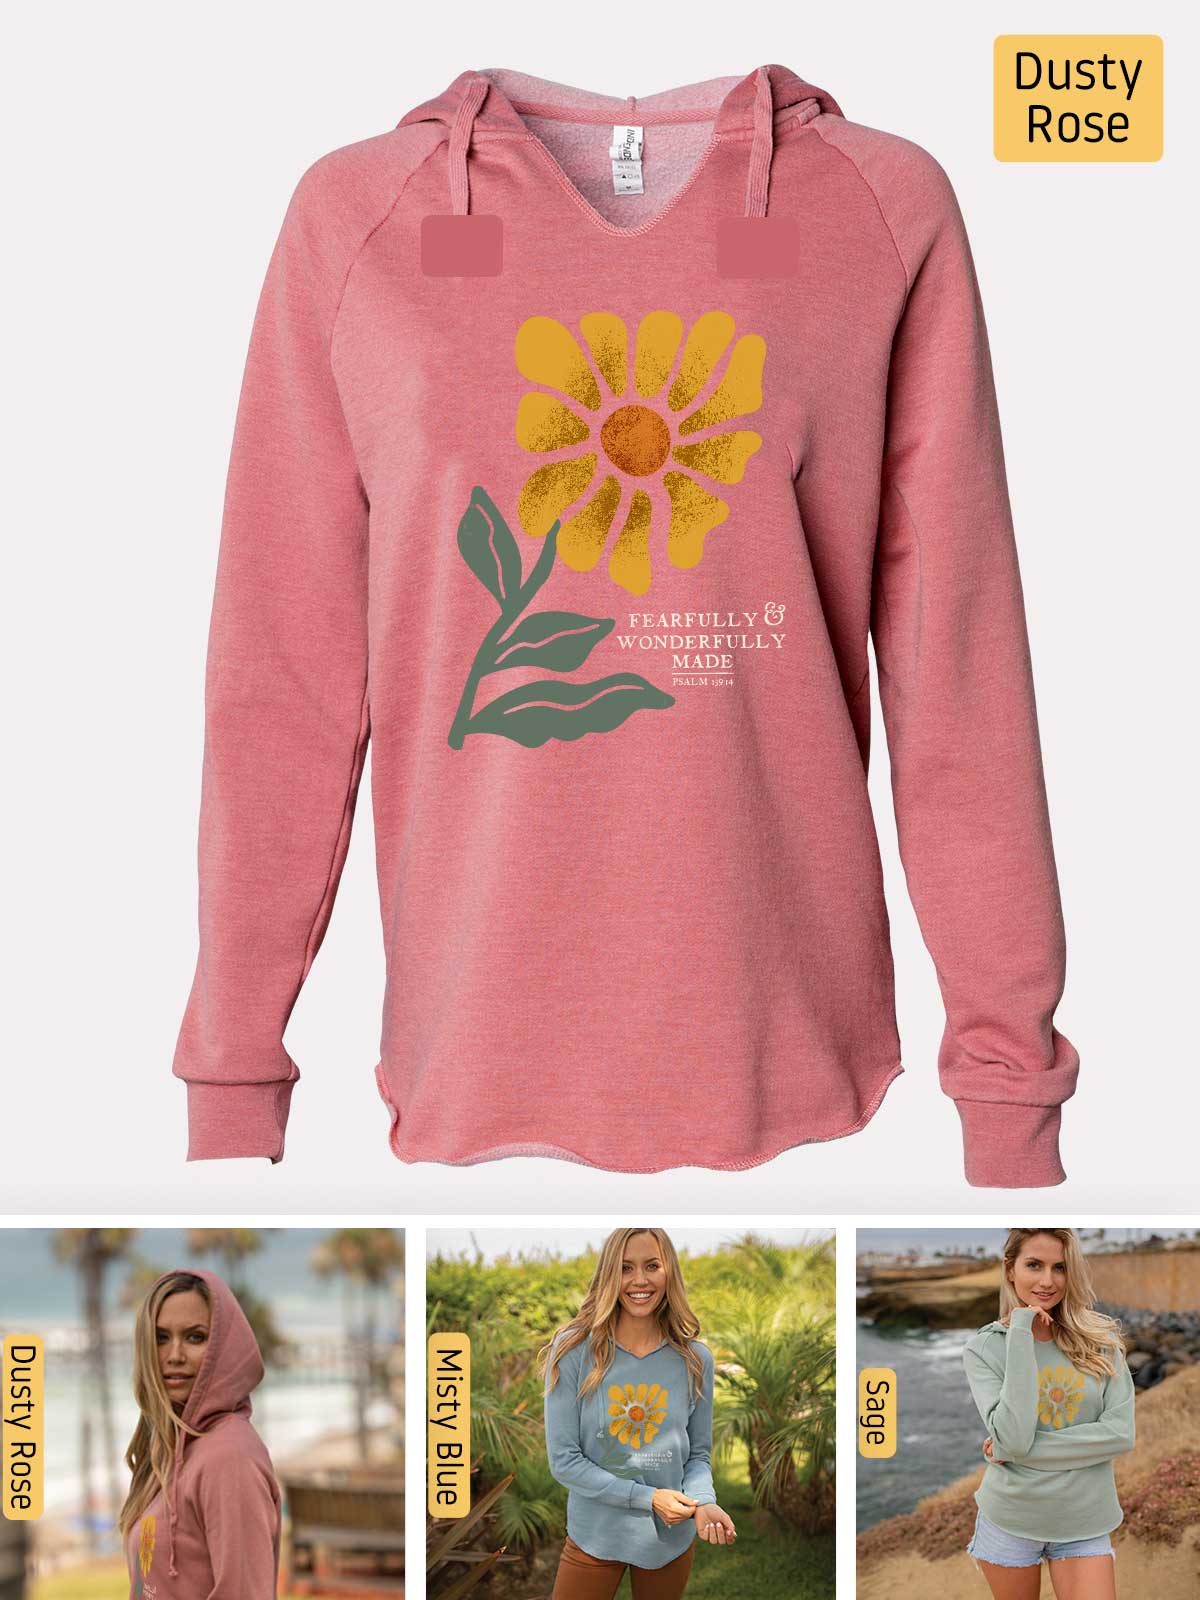 a woman wearing a pink sweatshirt with a yellow flower on it